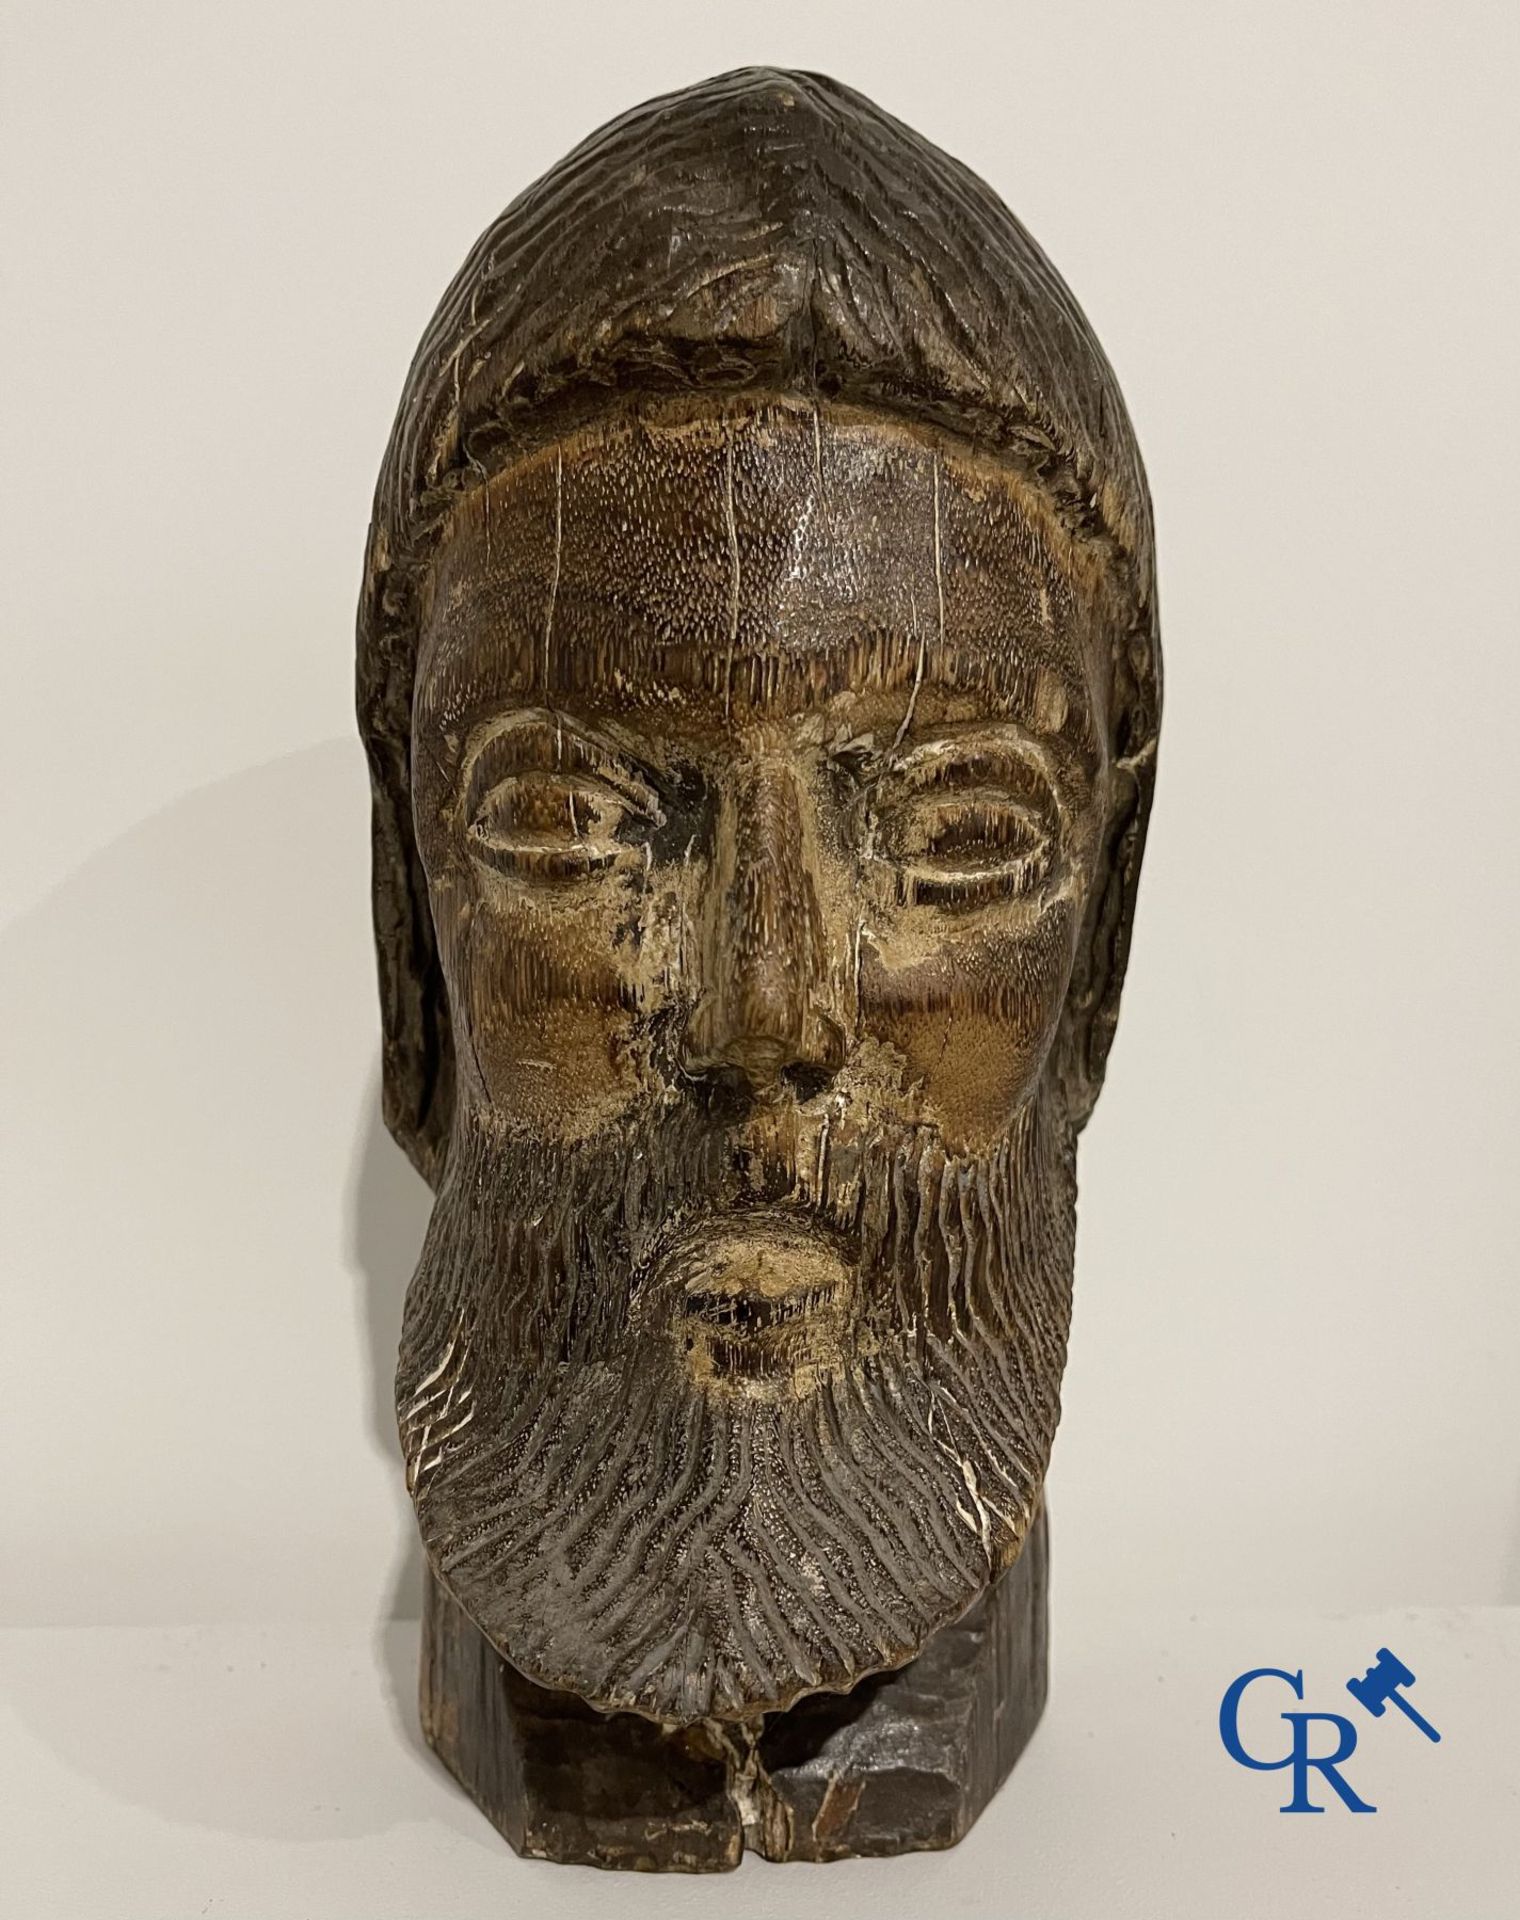 2 religious paintings and a wooden sculpted head of a saint.
19th century. - Image 6 of 7